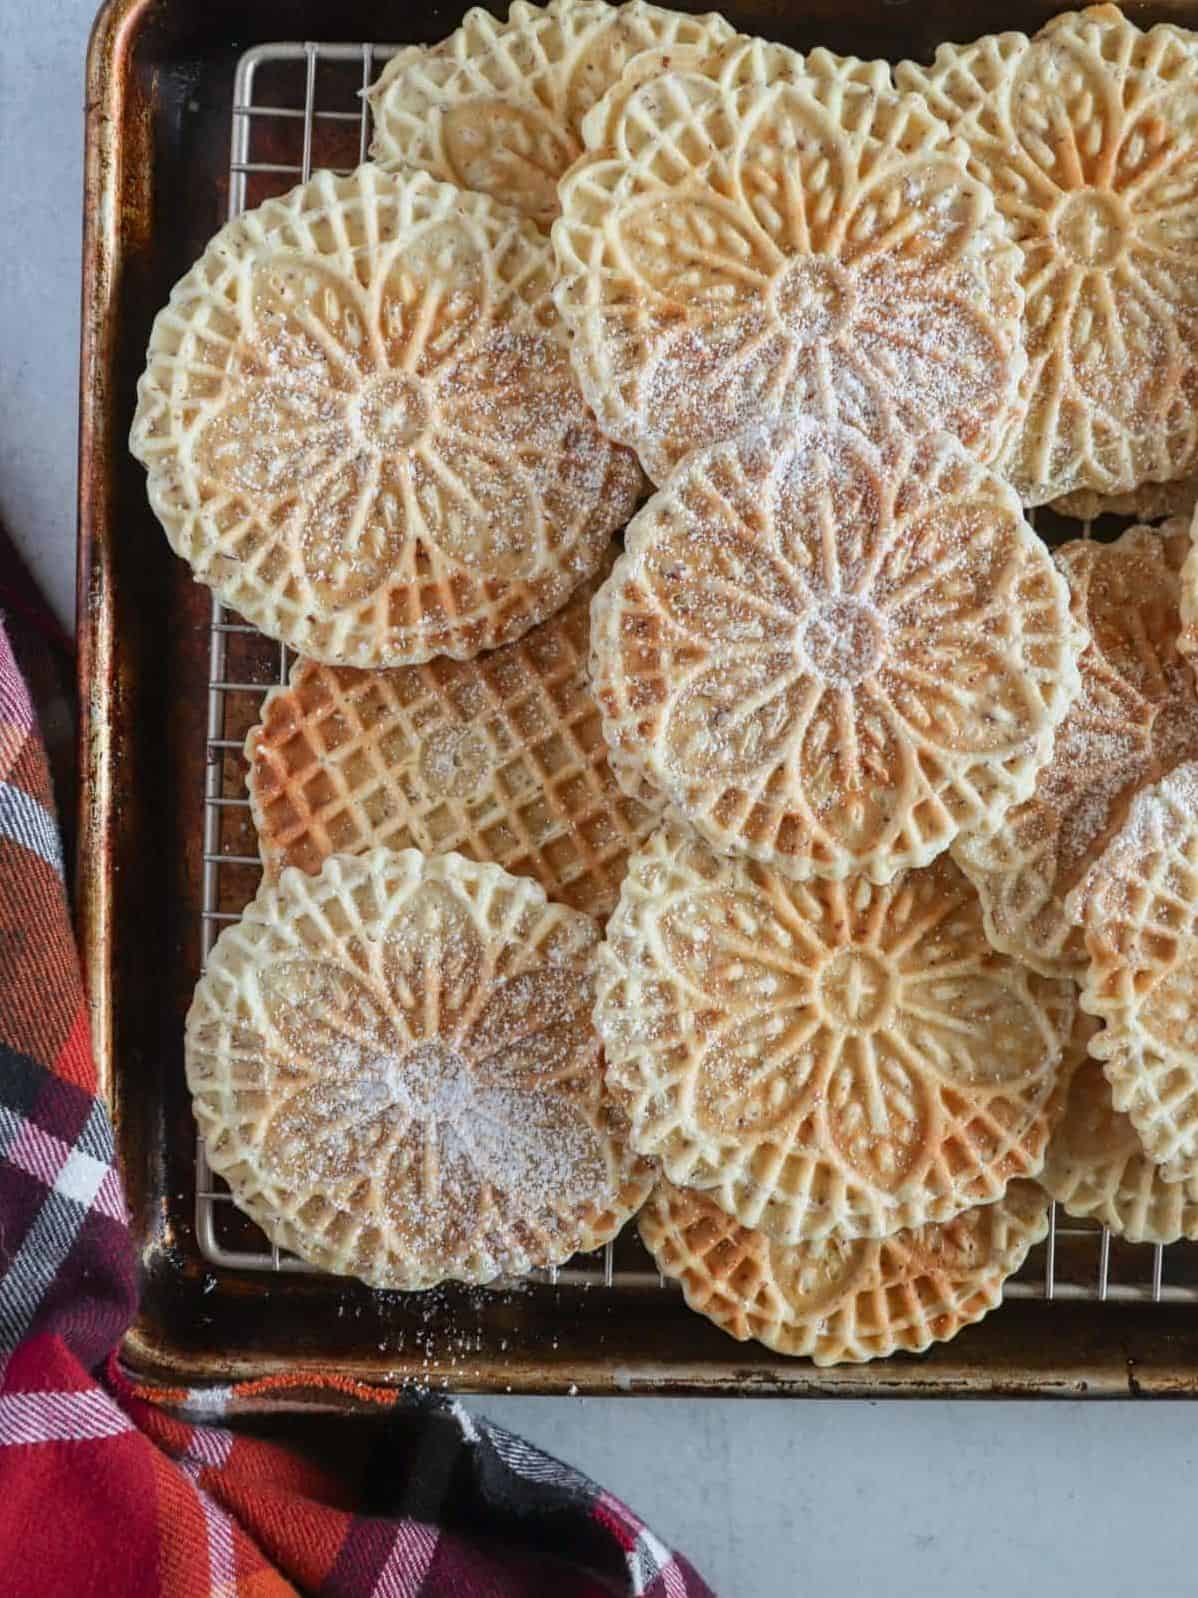  These vegan Pizzelle cookies are perfectly crispy and sweet